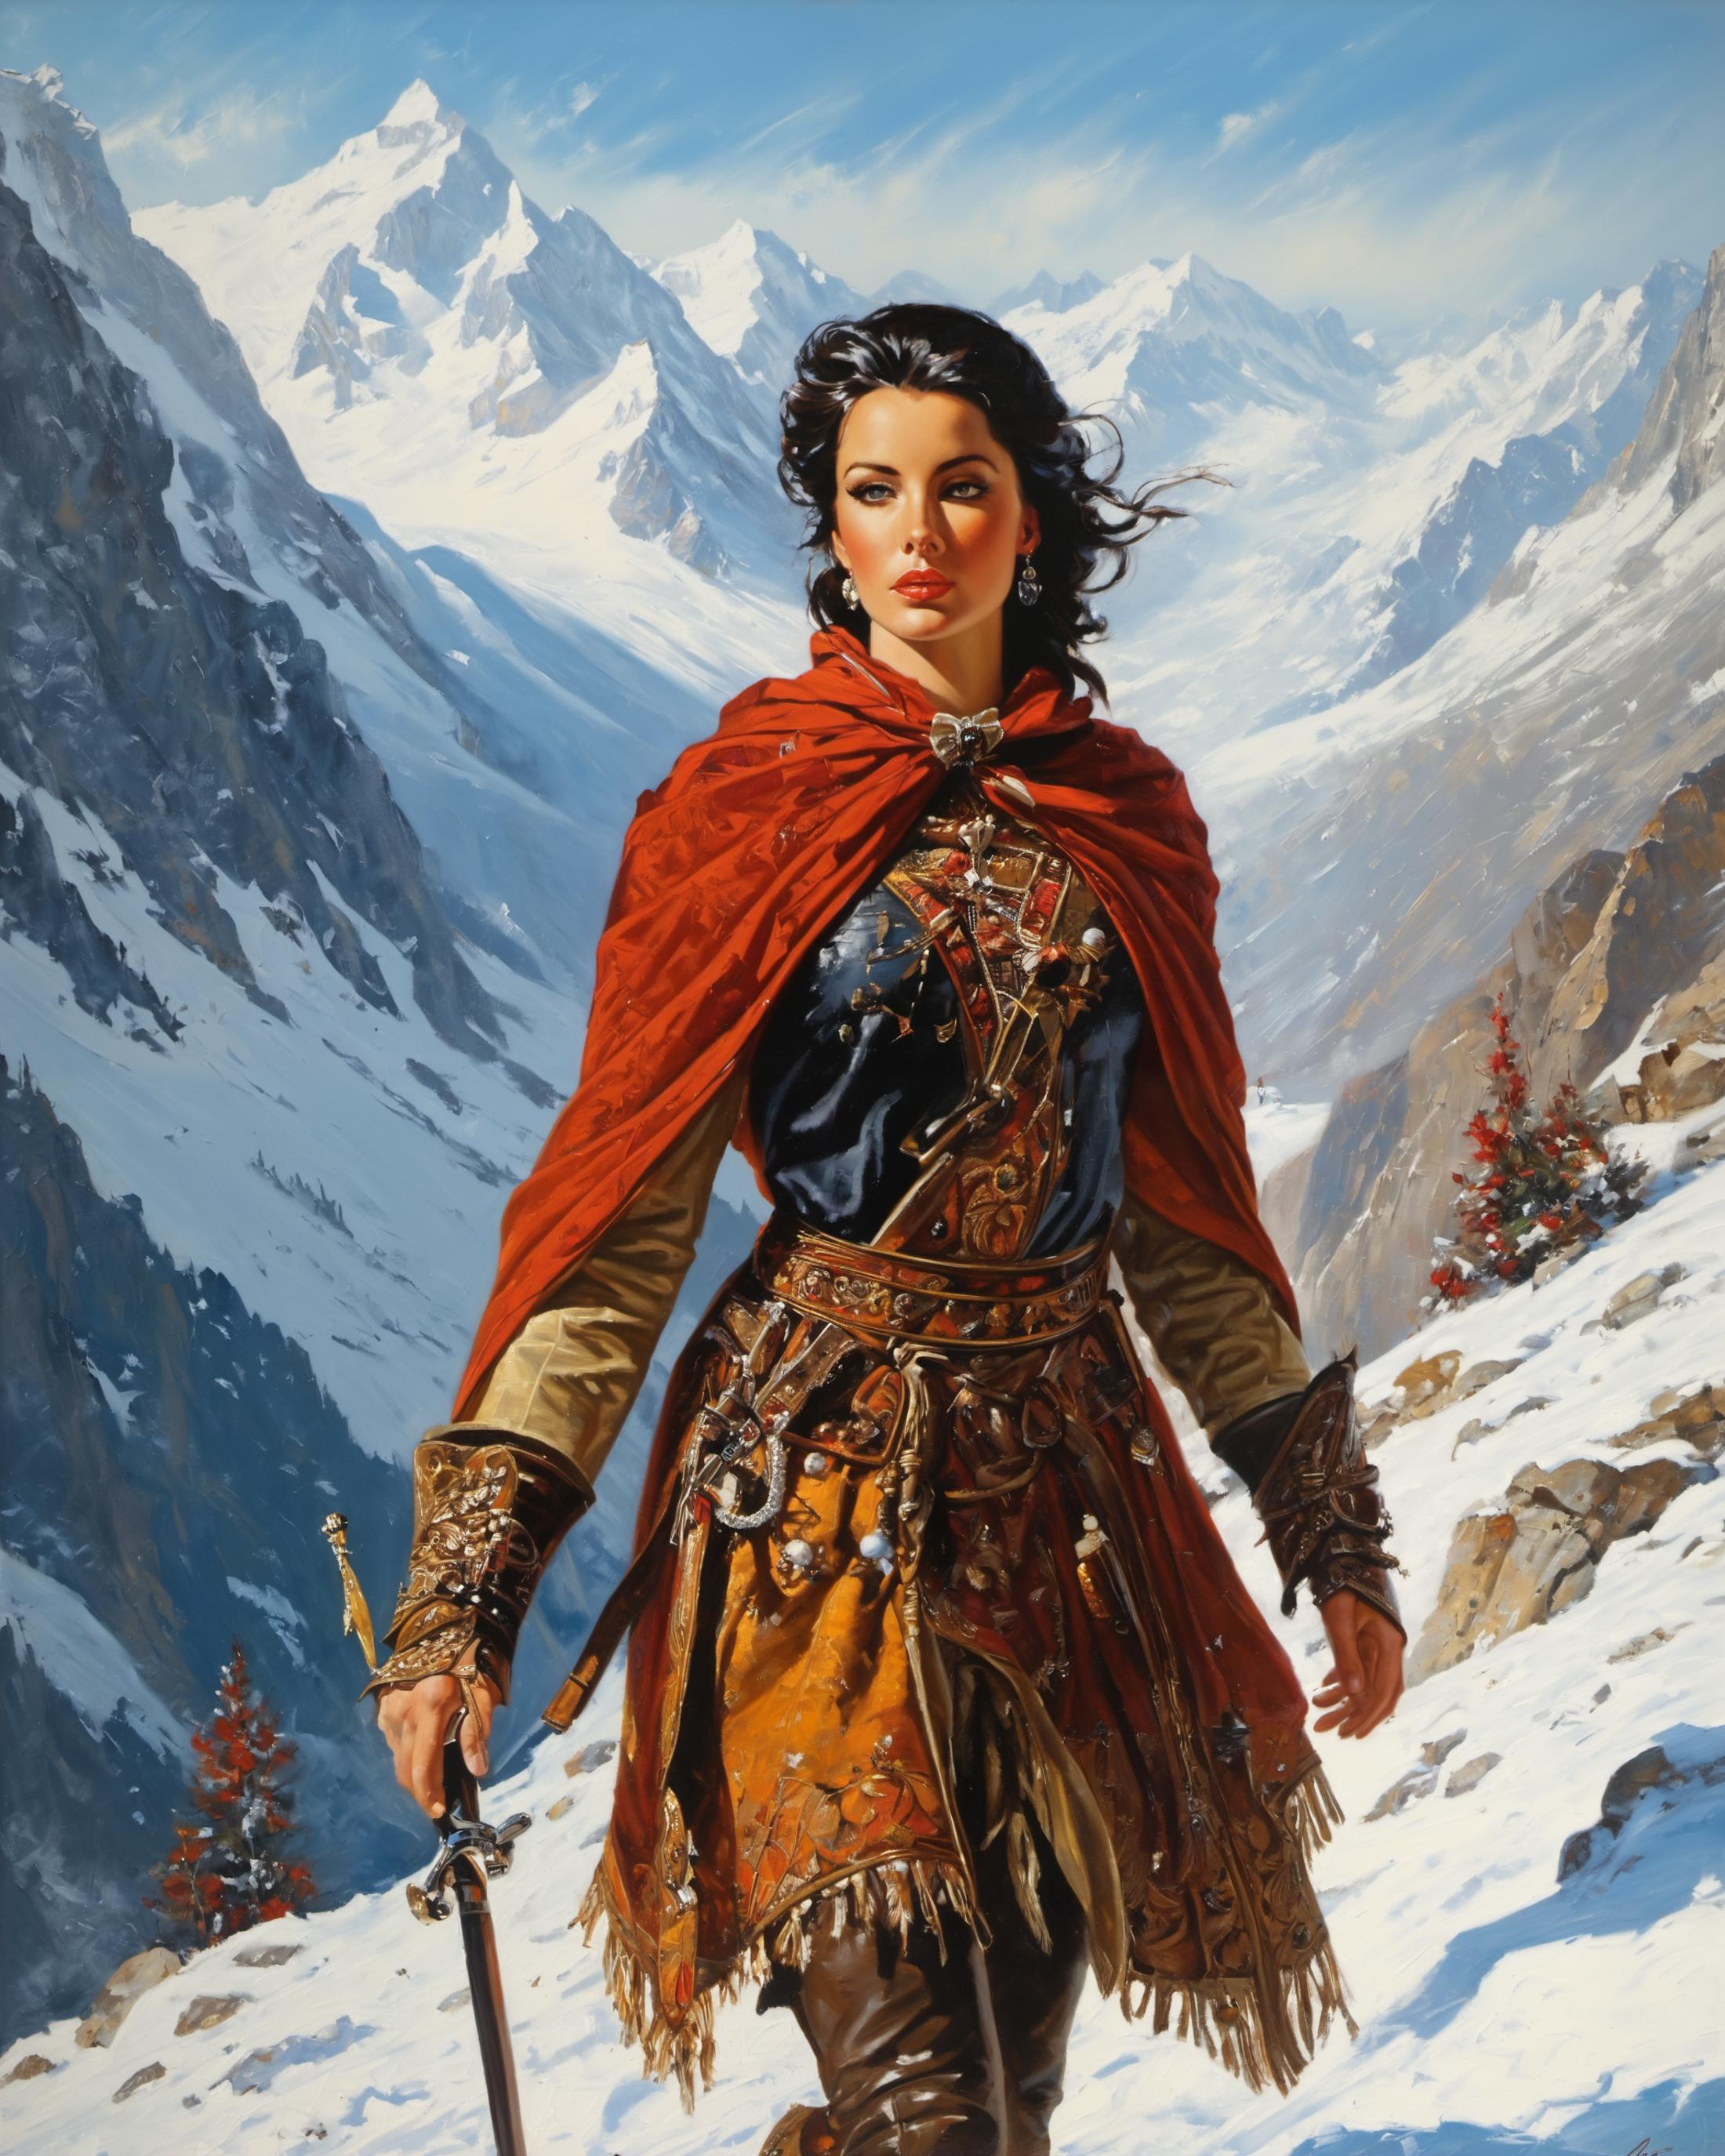 A painting of a woman in a red dress and a blue coat standing on a mountain with a sword in her hand.